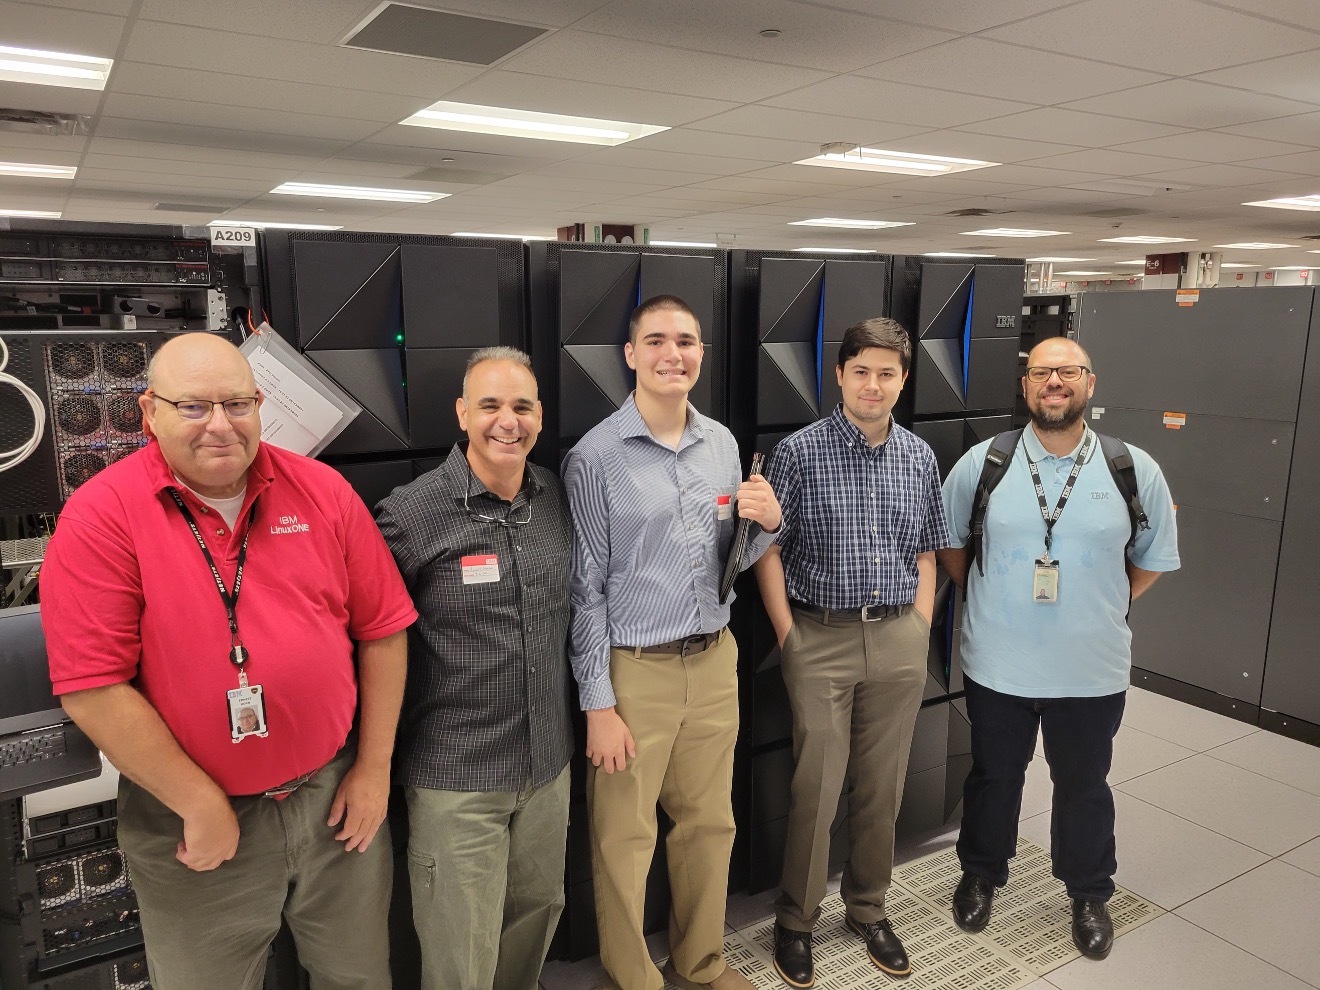 L to R: Paul Novak, Connor Kurkosky, Enzo Damato, Vinny Damato and Ernest Horn. The group stands in front of several mainframe machines..